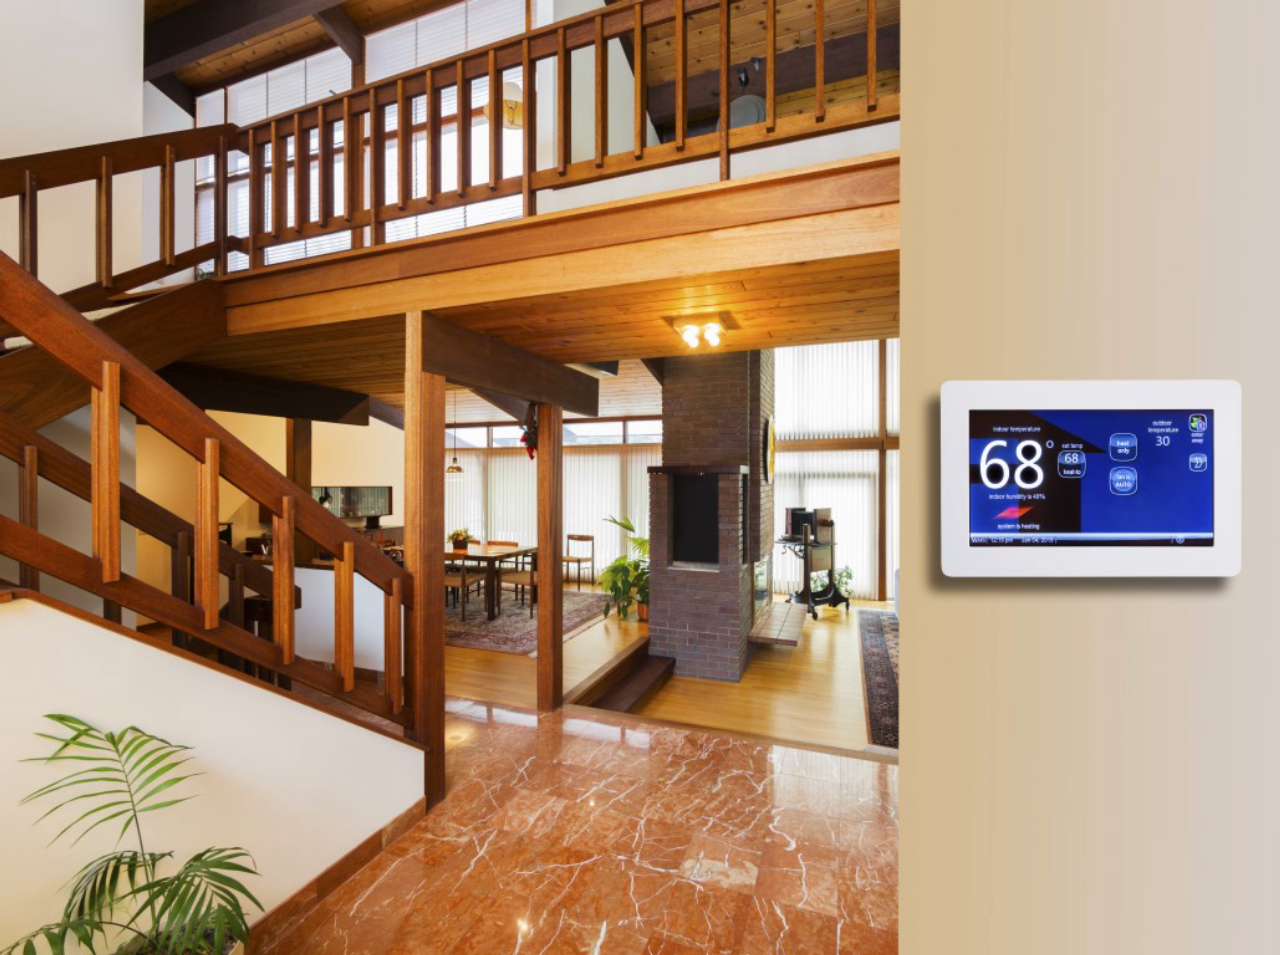 Programmable electronic thermostat for temperature control in living room hall way